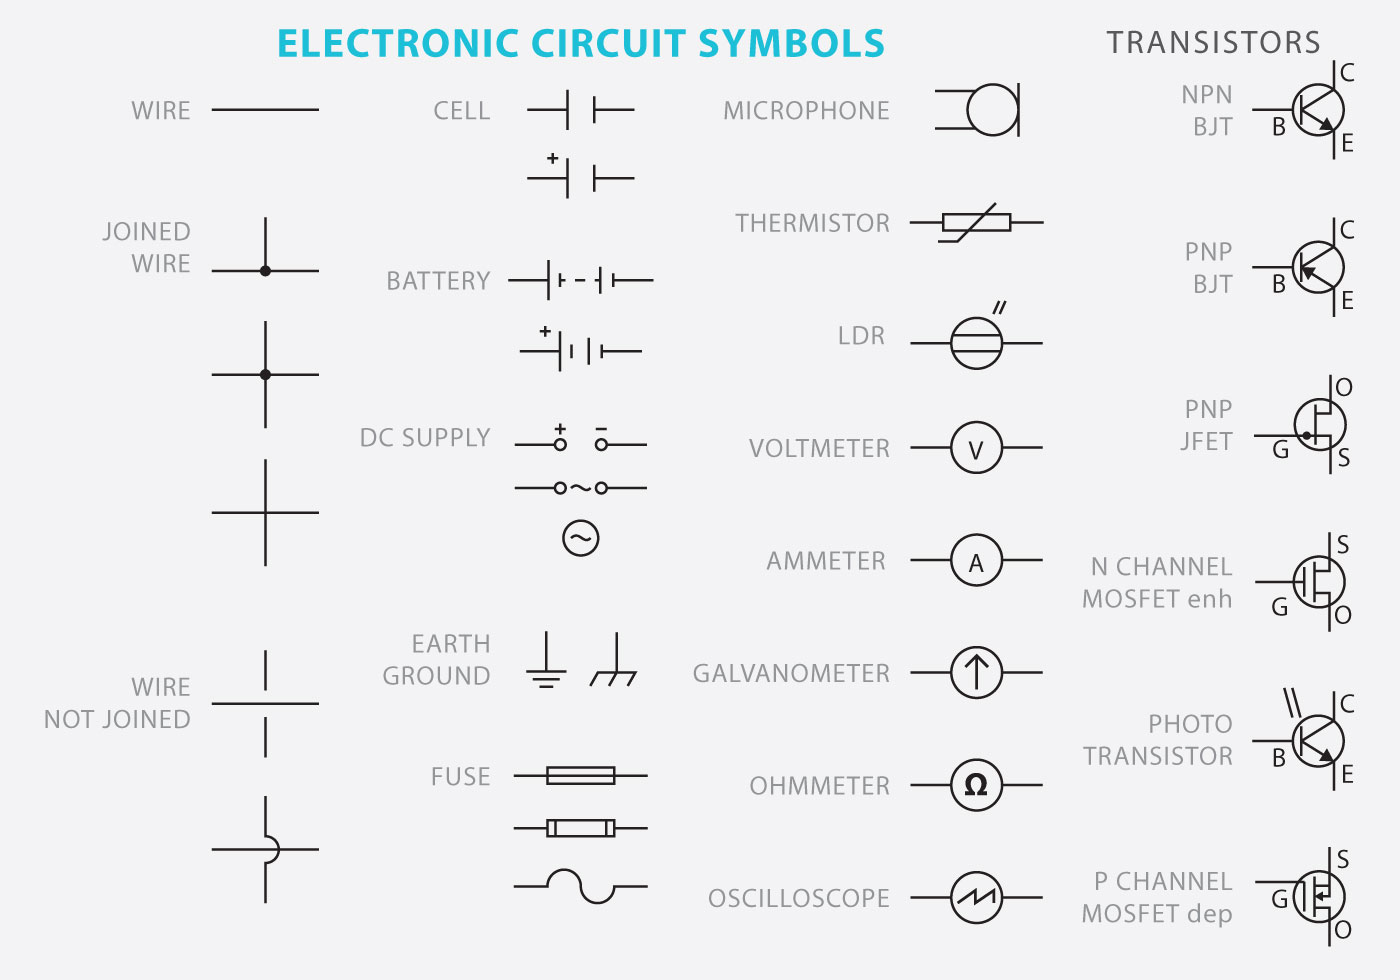 autocad electrical symbol library